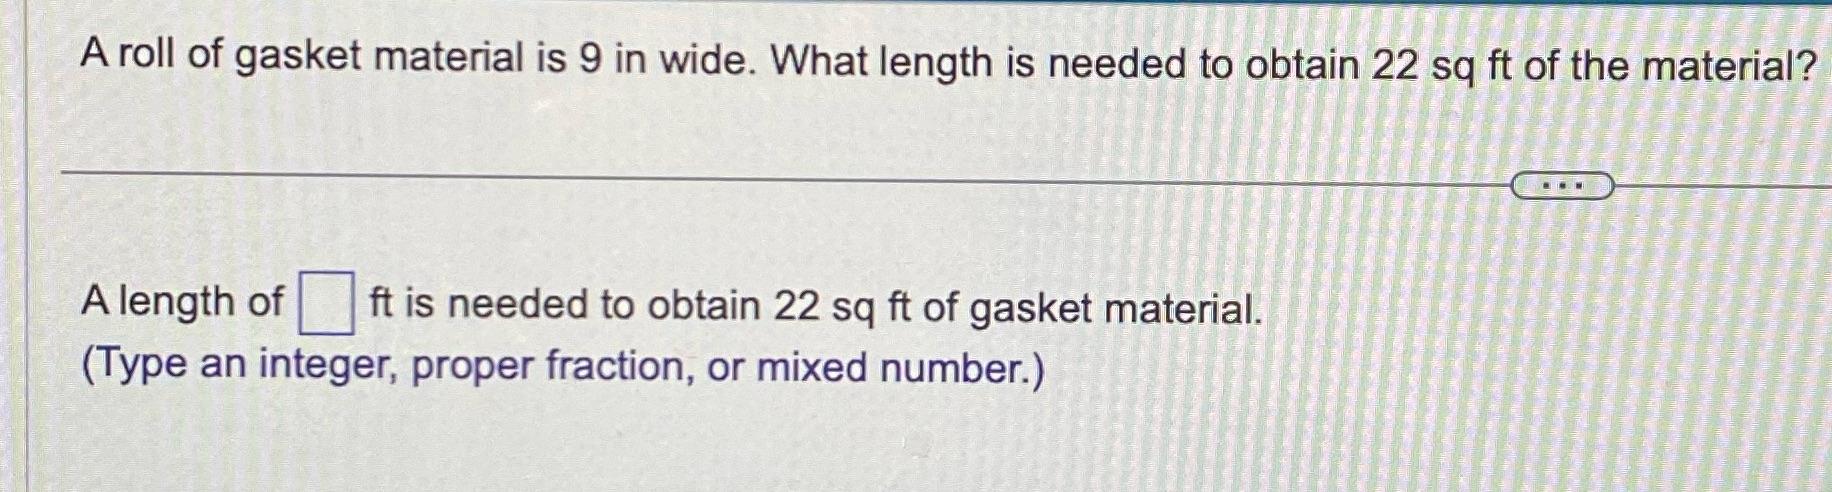 A roll of gasket material is 9 in wide. What length is needed to obtain 22 sq ft of the material? A length of